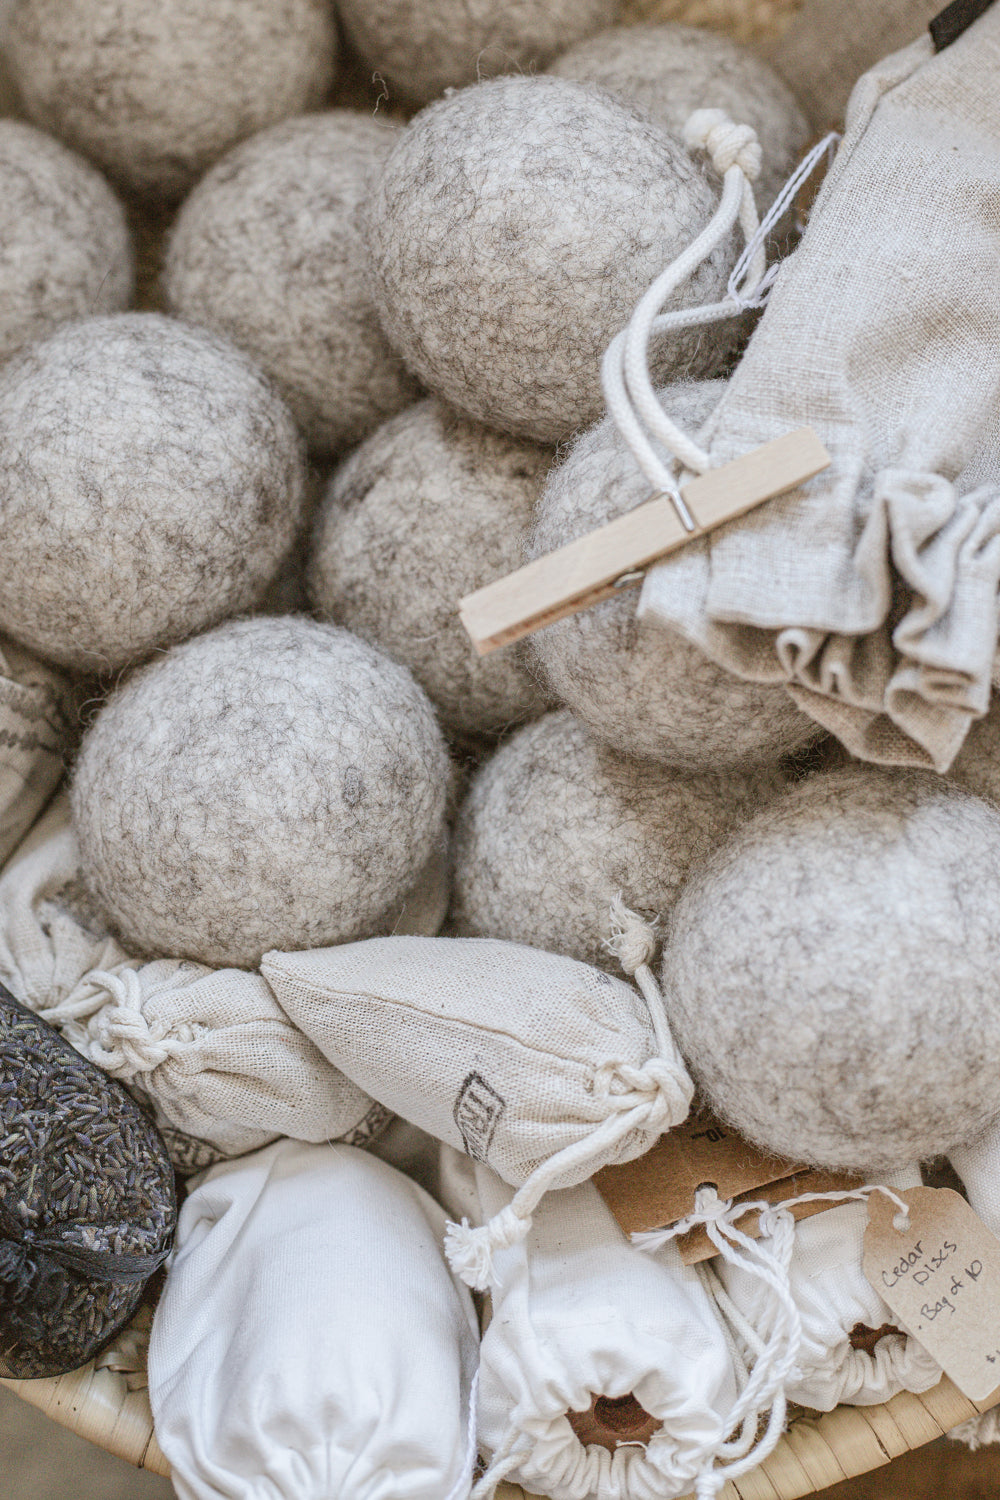 wool dryer balls, linen bag of wooden clothes pins, sachets of organic dried lavender, and cedar discs in drawstring bags